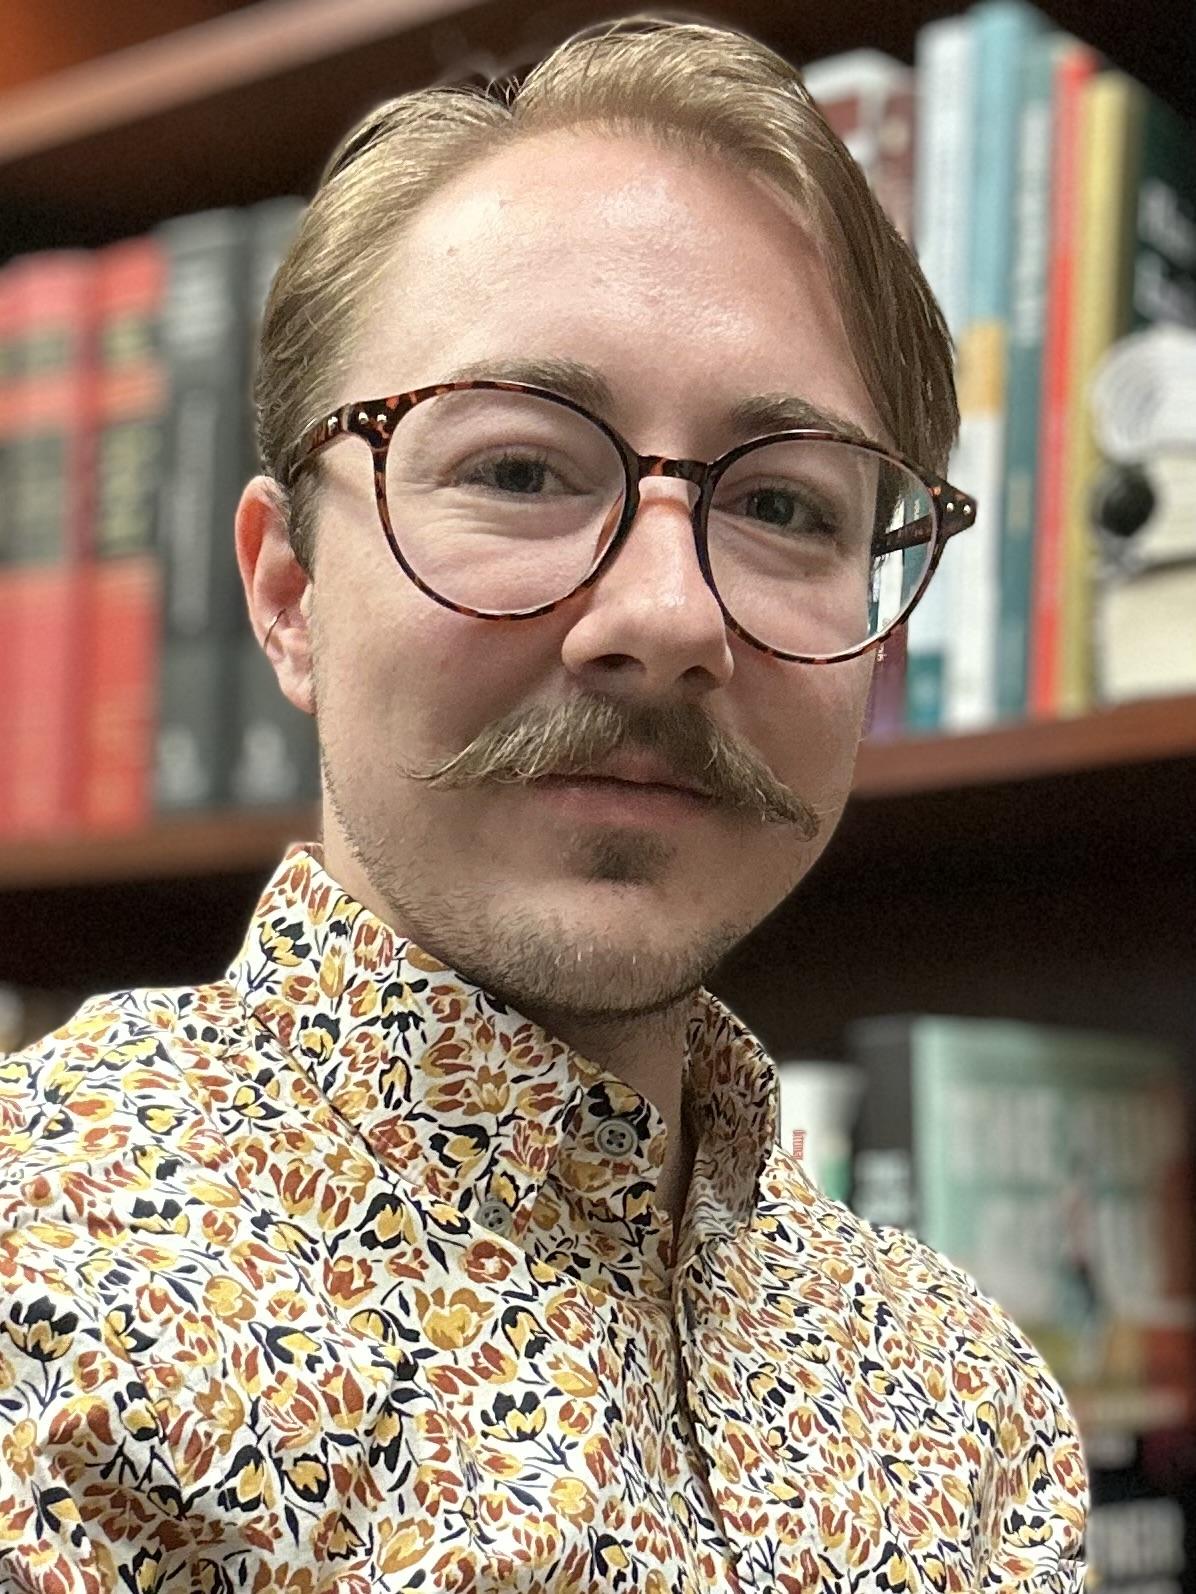 Young white trans guy with large glasses and a small handlebar mustache